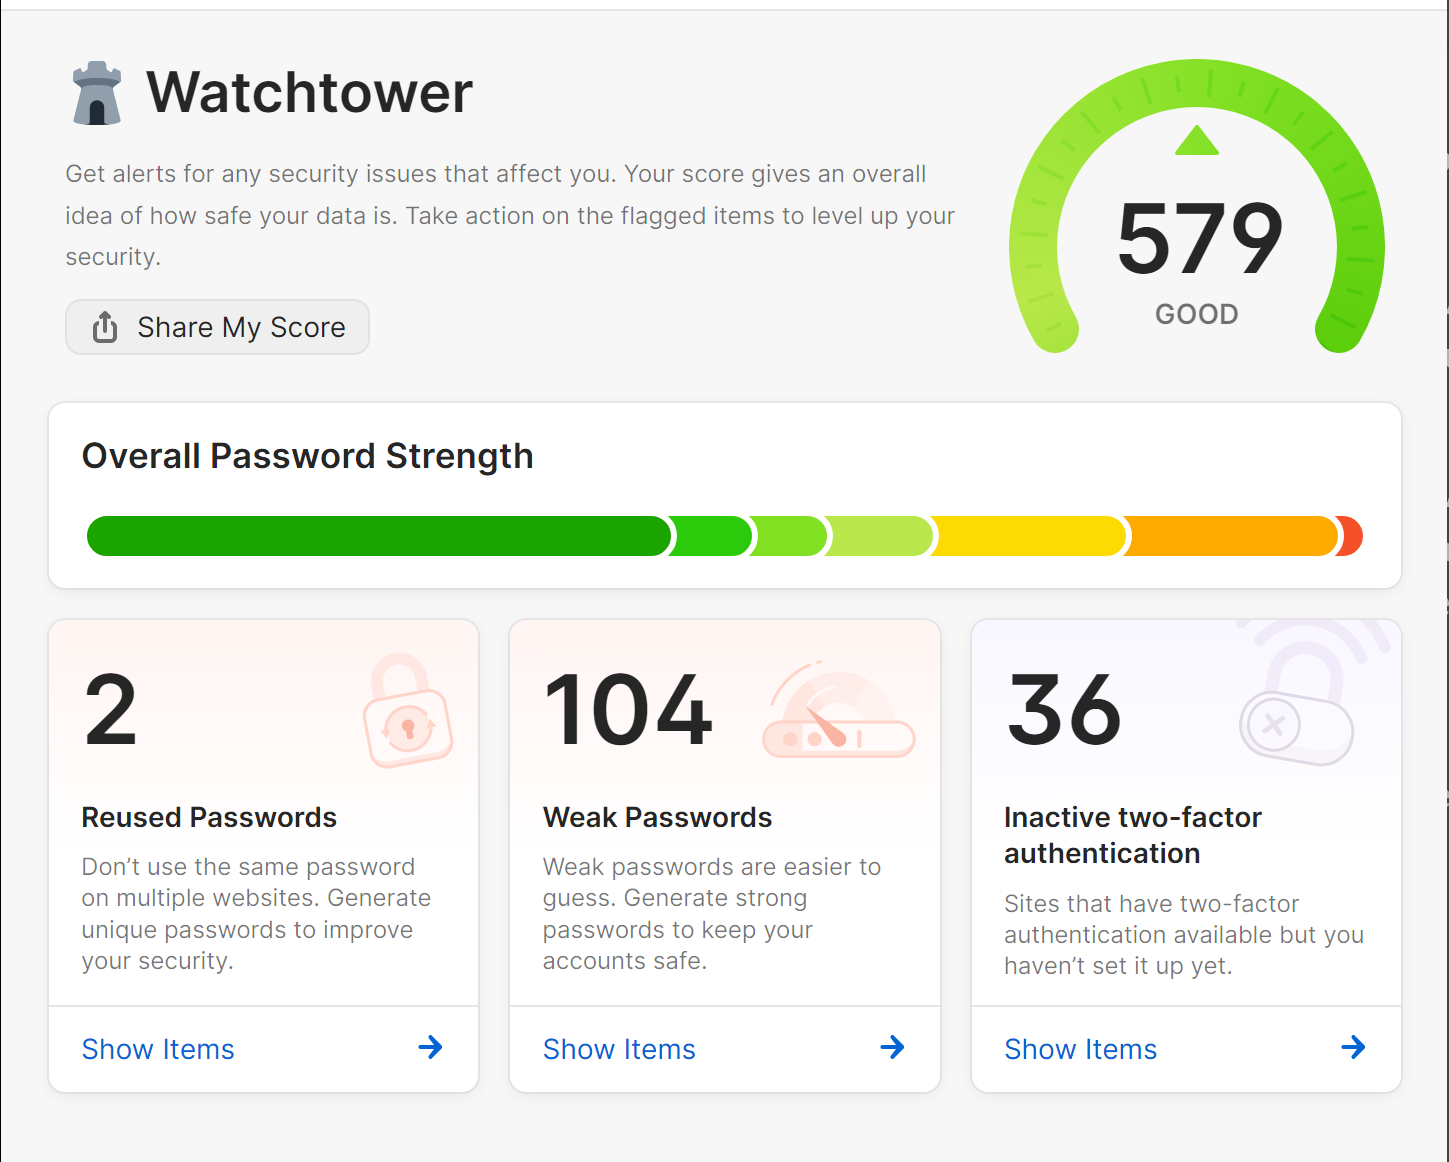 This screenshot shows the Watchtower page from 1Password, with a rating of overall password strength and separate boxes listing numbers of reused passwords, weak passwords, and inactive two-factor authentication